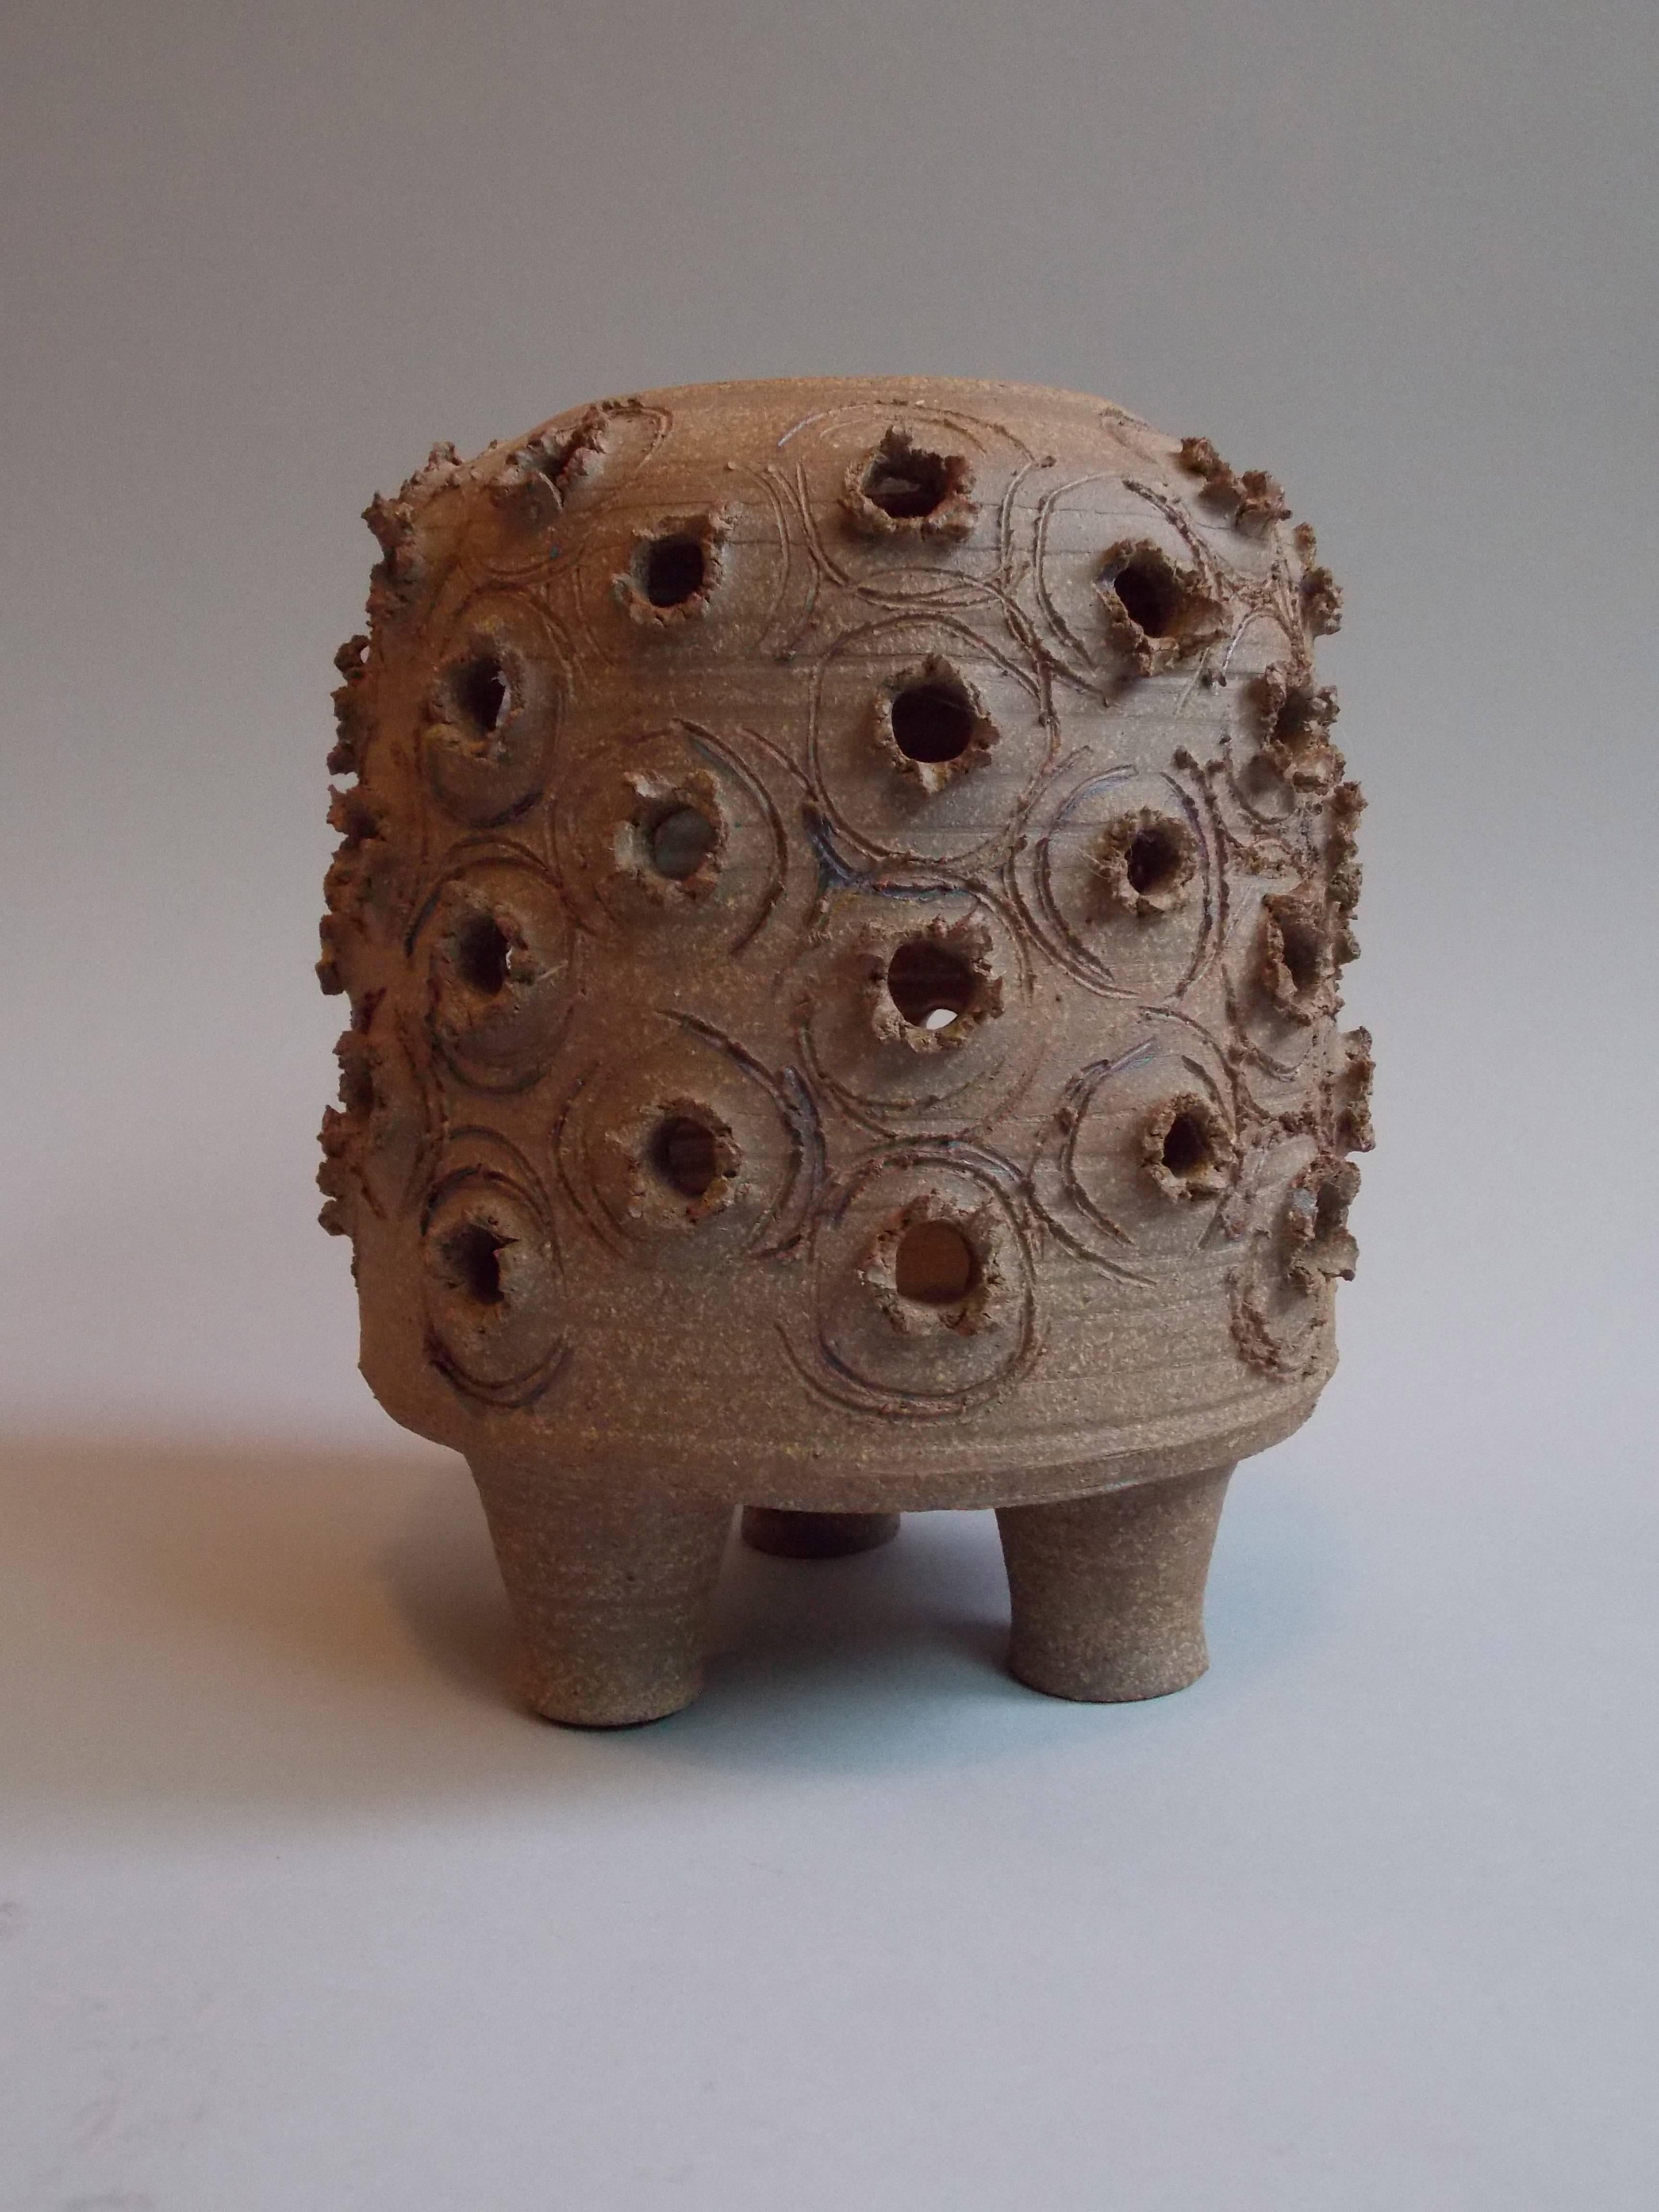 Pro Artisan / Studio Pottery / California Design.
One-of-a-kind.
Wheel thrown high fired stoneware form.
Made with Cressey's formula clay and hand pierced with carved pattern design for candle or electric light to stream through.
No chips, cracks or